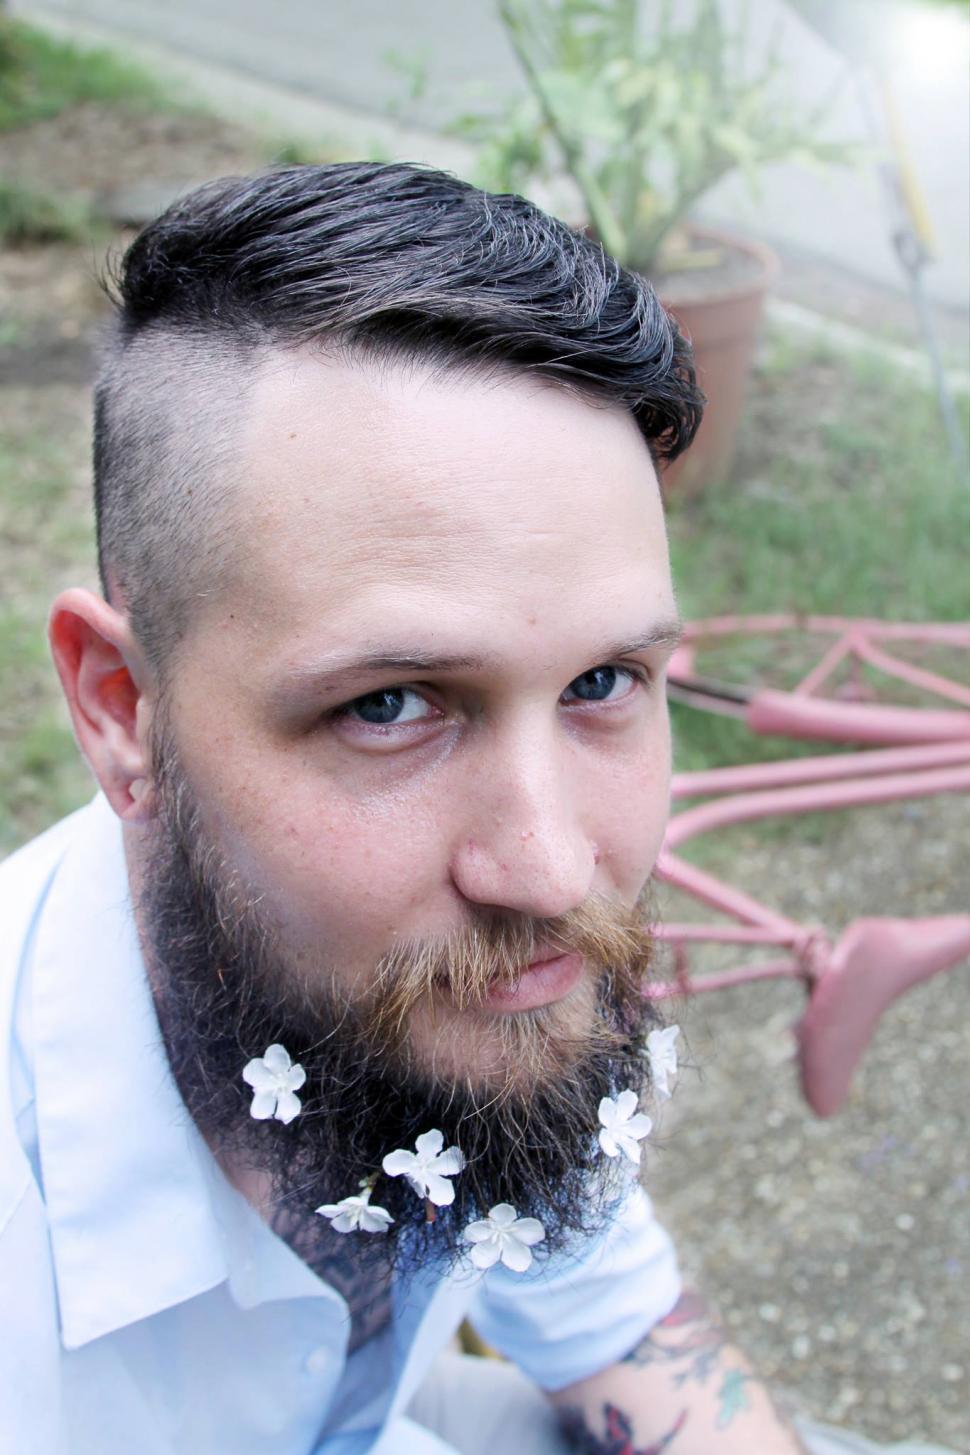 Free Image of Urban man with flowers on beard sitting in the park 